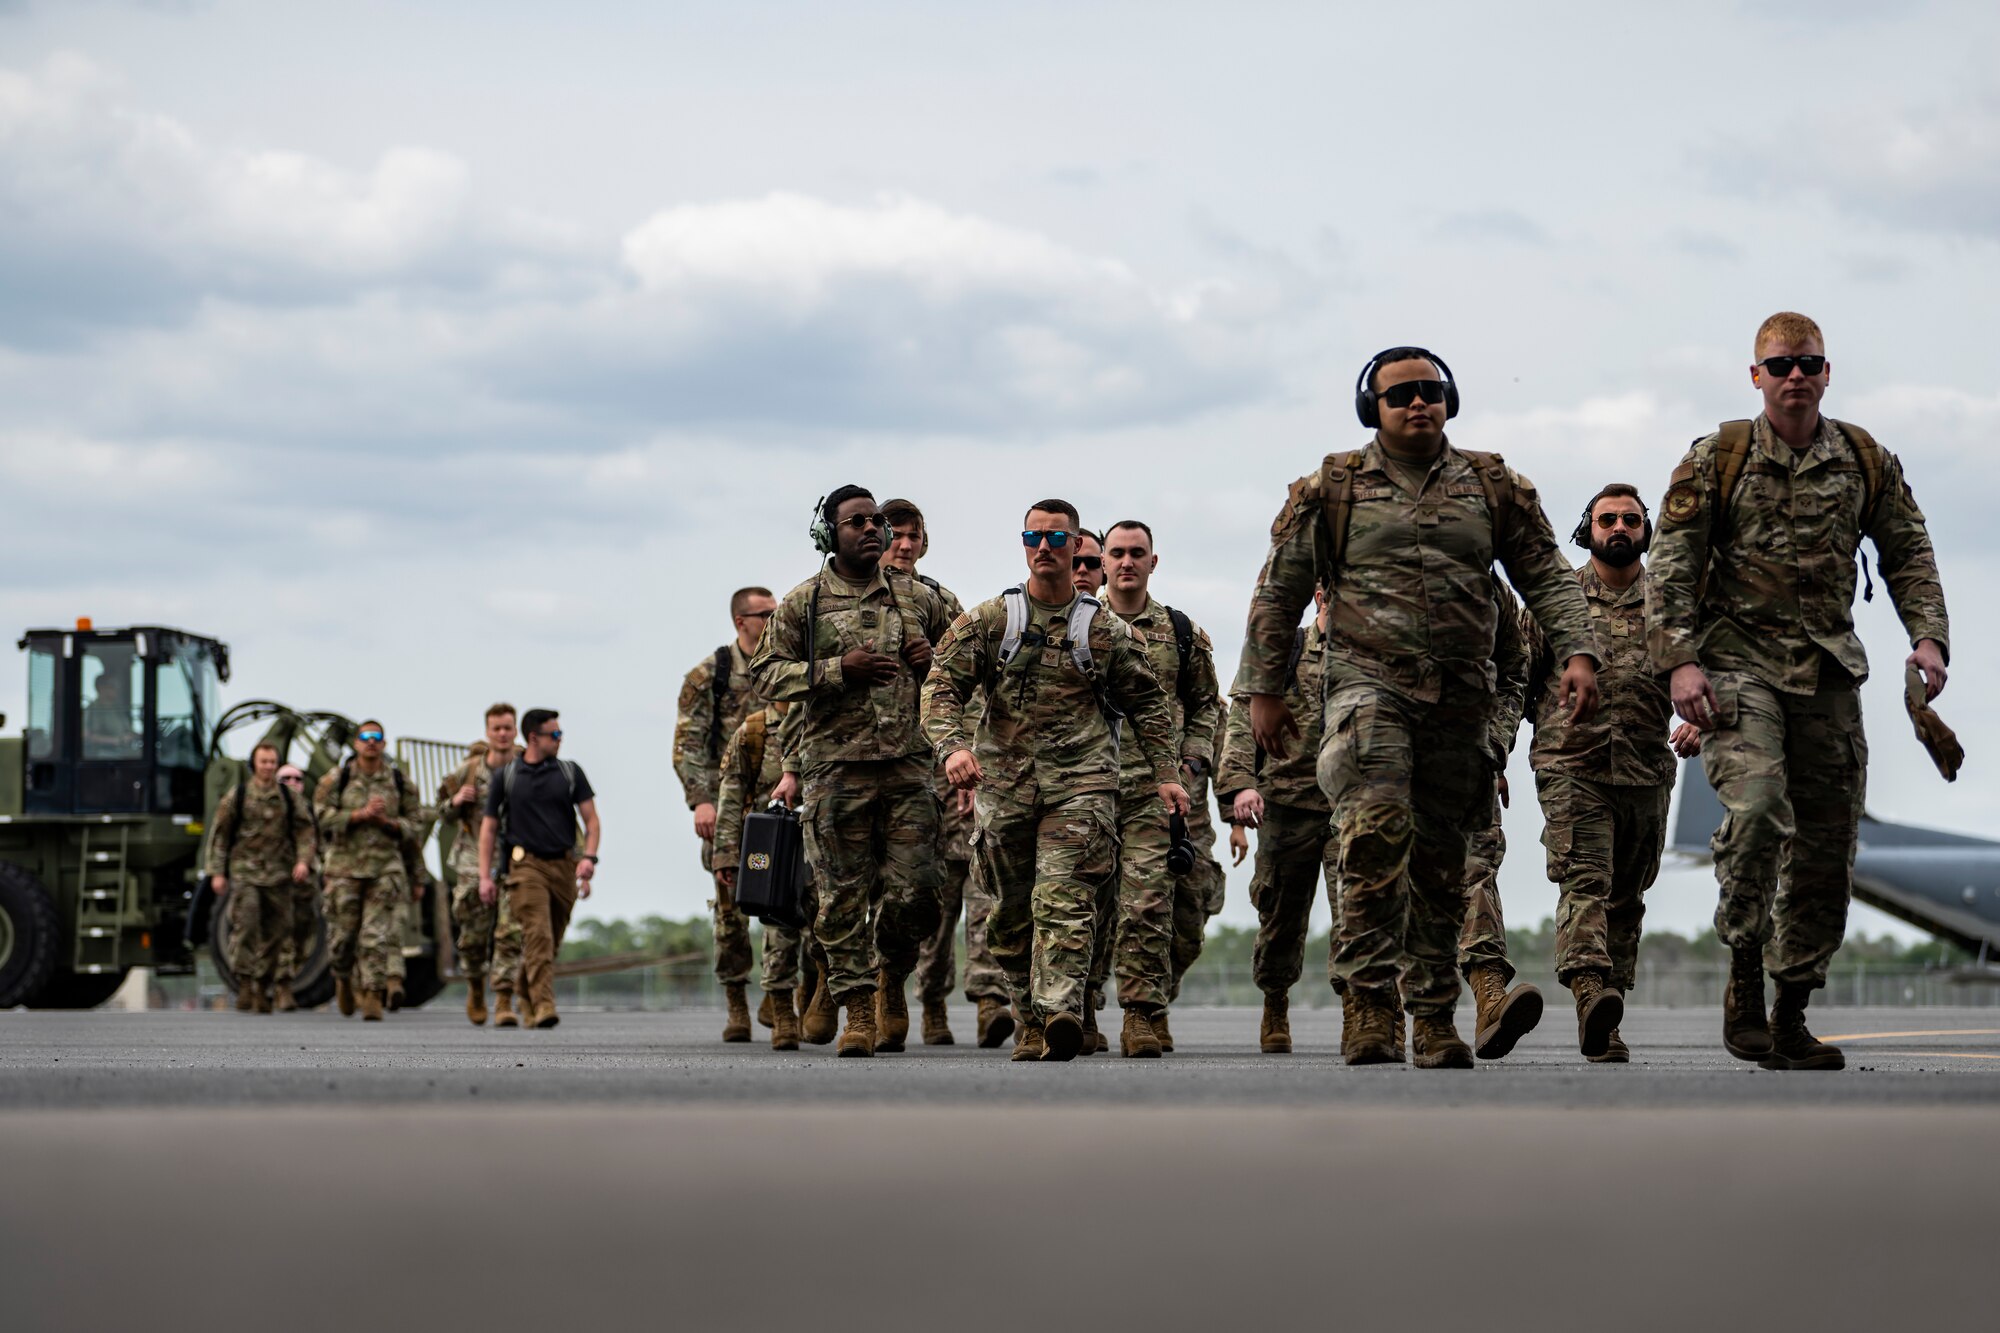 U.S. Air Force Airmen assigned to the 23rd Wing arrive at Avon Park Air Force Range, Florida, for exercise Ready Tiger 24-1, April 9, 2024. The 23rd Wing sent Airmen from every specialty needed to operate expeditionary air bases at dispersed locations. During Ready Tiger 24-1, exercise inspectors will assess the 23rd Wing's proficiency in employing decentralized command and control to fulfill air tasking orders across geographically dispersed areas amid communication challenges, integrating Agile Combat Employment principles such as integrated combat turns, forward aerial refueling points, multi-capable Airmen, and combat search and rescue capabilities. (U.S. Air Force photo by Tech. Sgt. Devin Boyer)